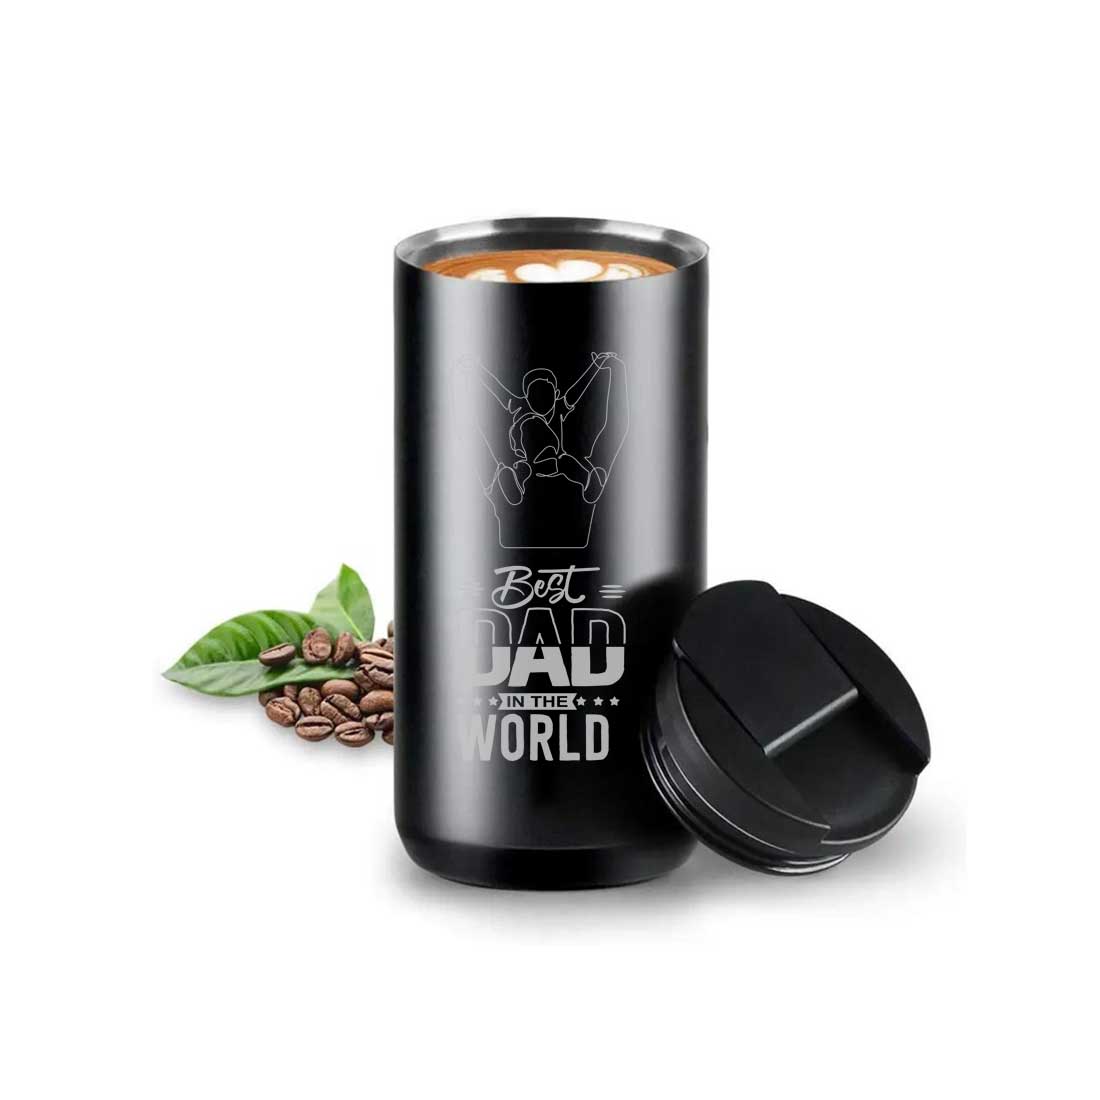 Useful Gifts for Dad Travel Coffee Tumbler Sipper Flask - Best Dad